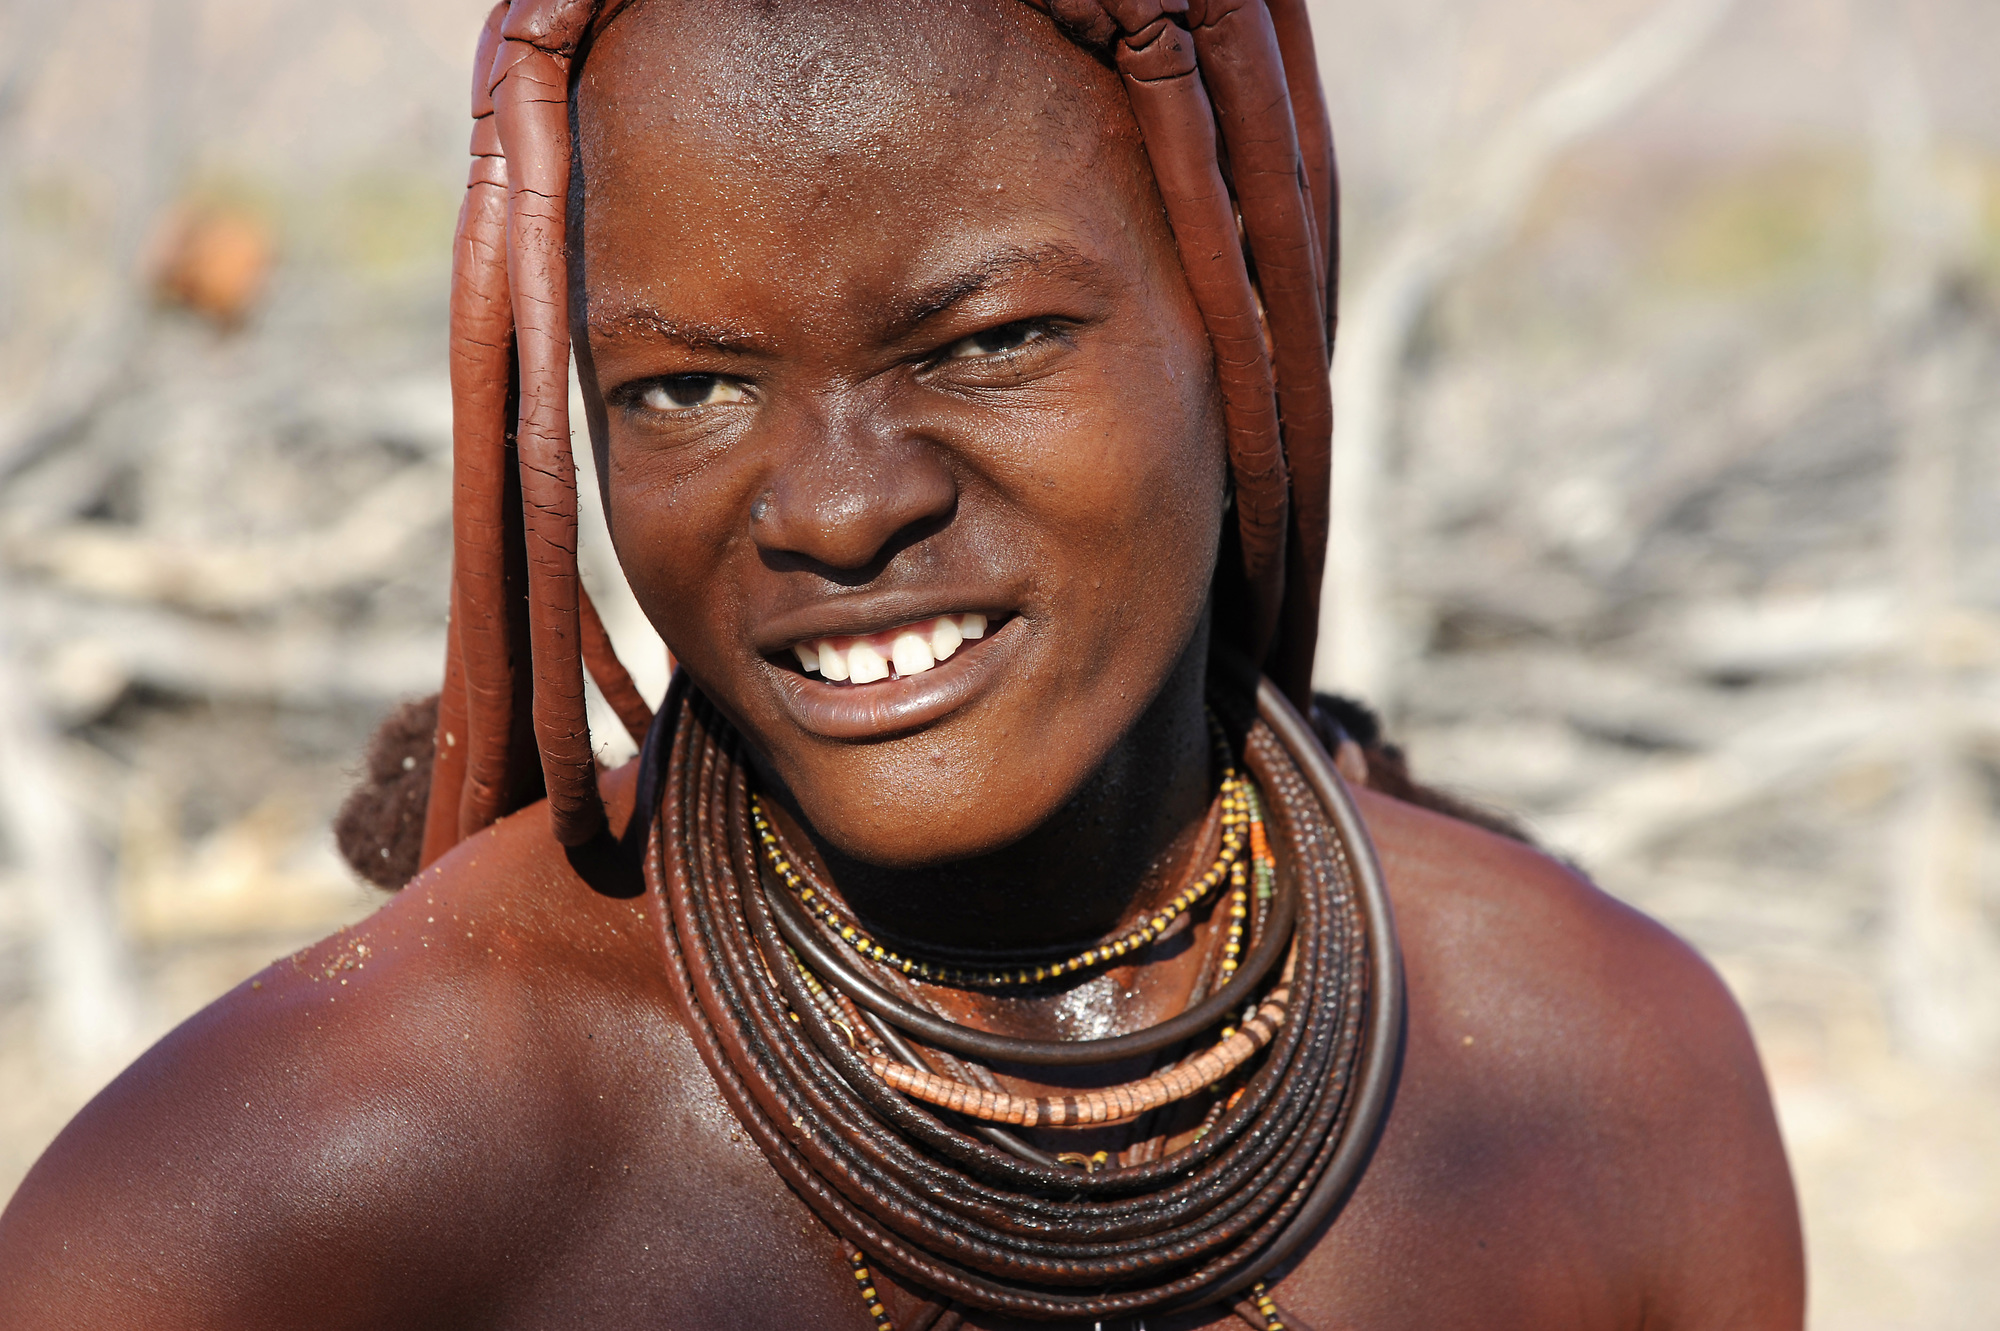 Himba 26 Kaokoveld Pictures Namibia In Global Geography 